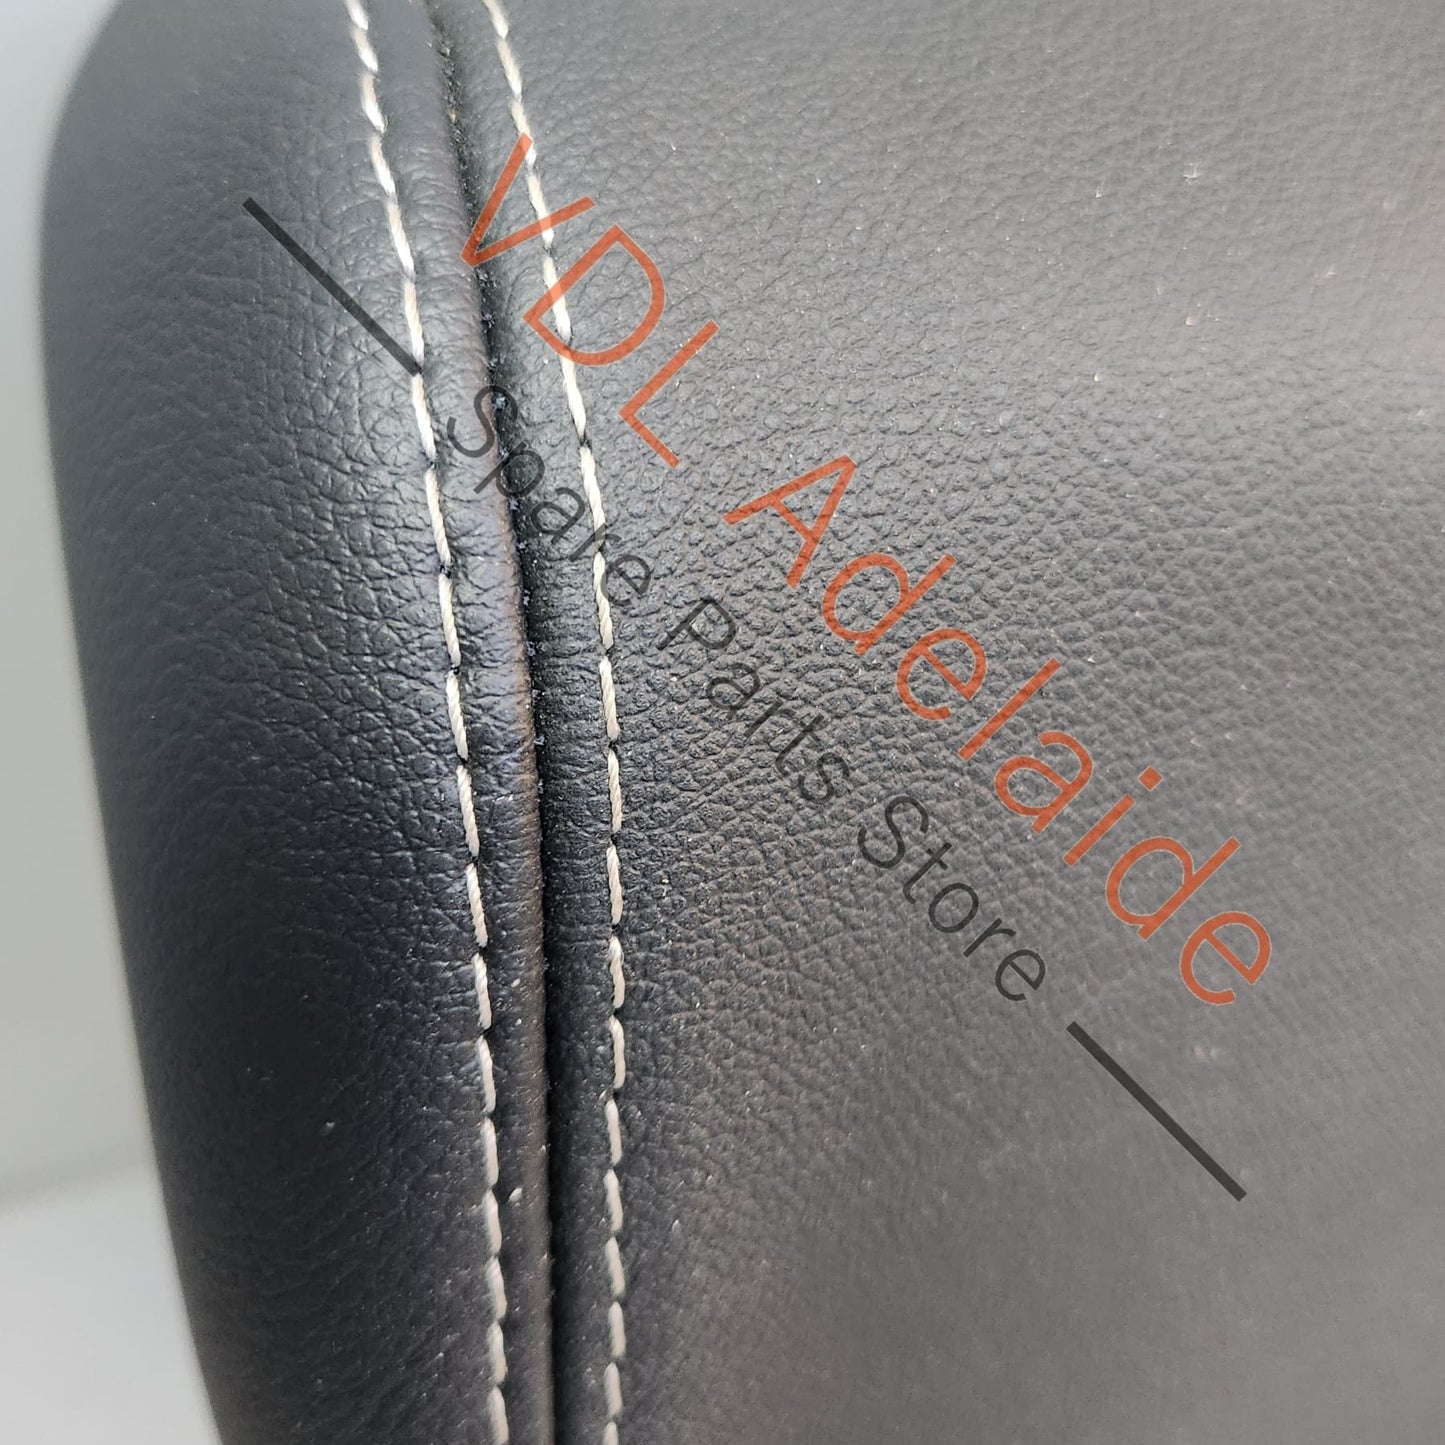 864300022R   Renault Megane 3 Rear Seat Left or Right Side Headrest 864300022R Leather white stitch